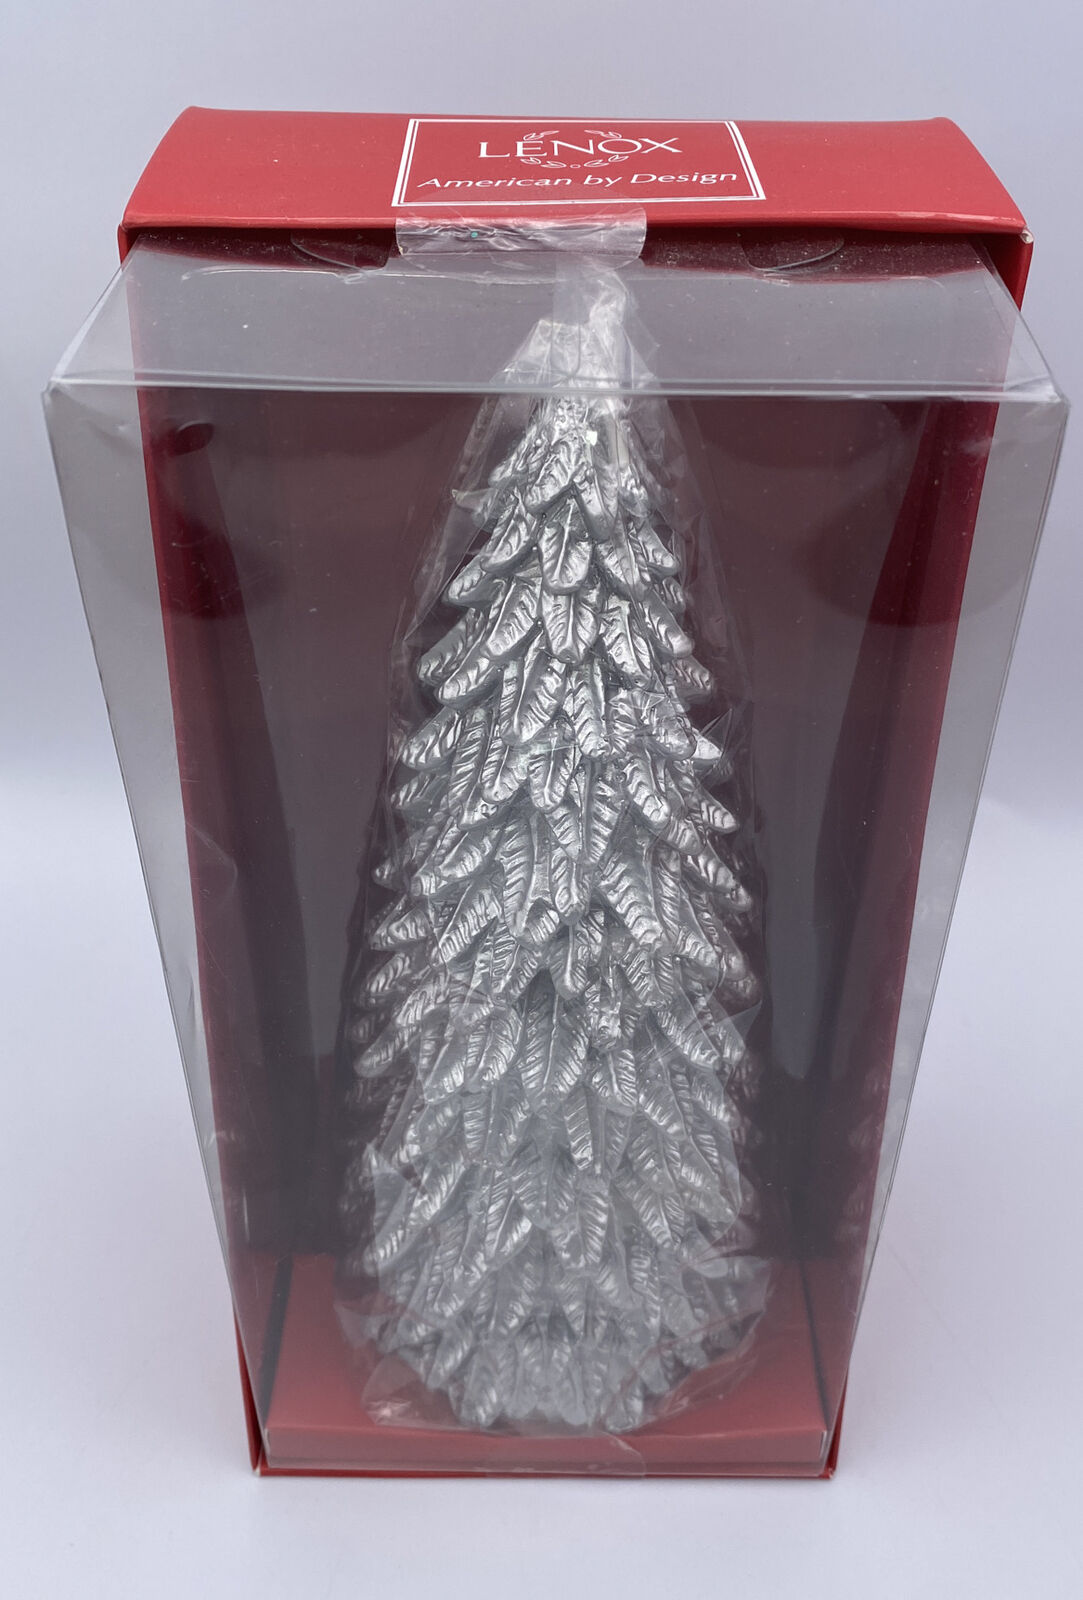 Lenox Christmas Tree Candle Silver Metallic Collectable Lenox Holiday New In Box